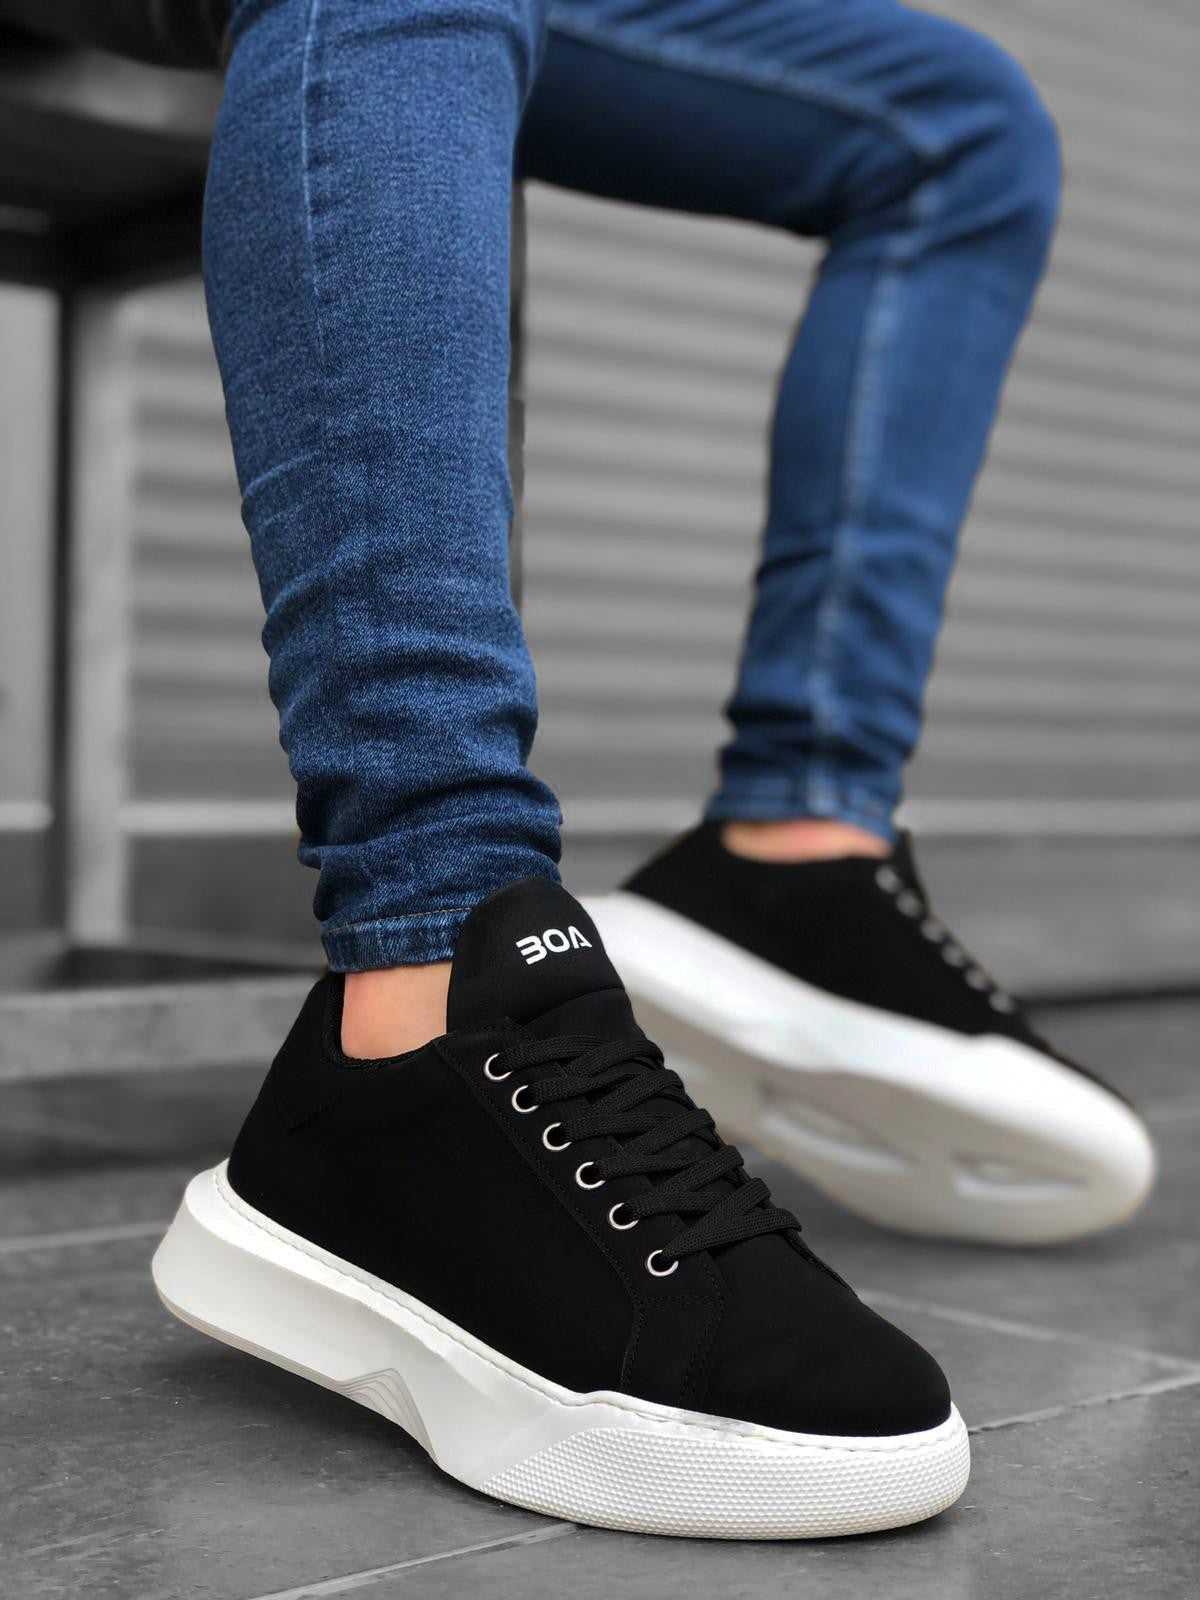 BA0161 Lace-up Men's High Sole Black White Sneakers - STREETMODE ™